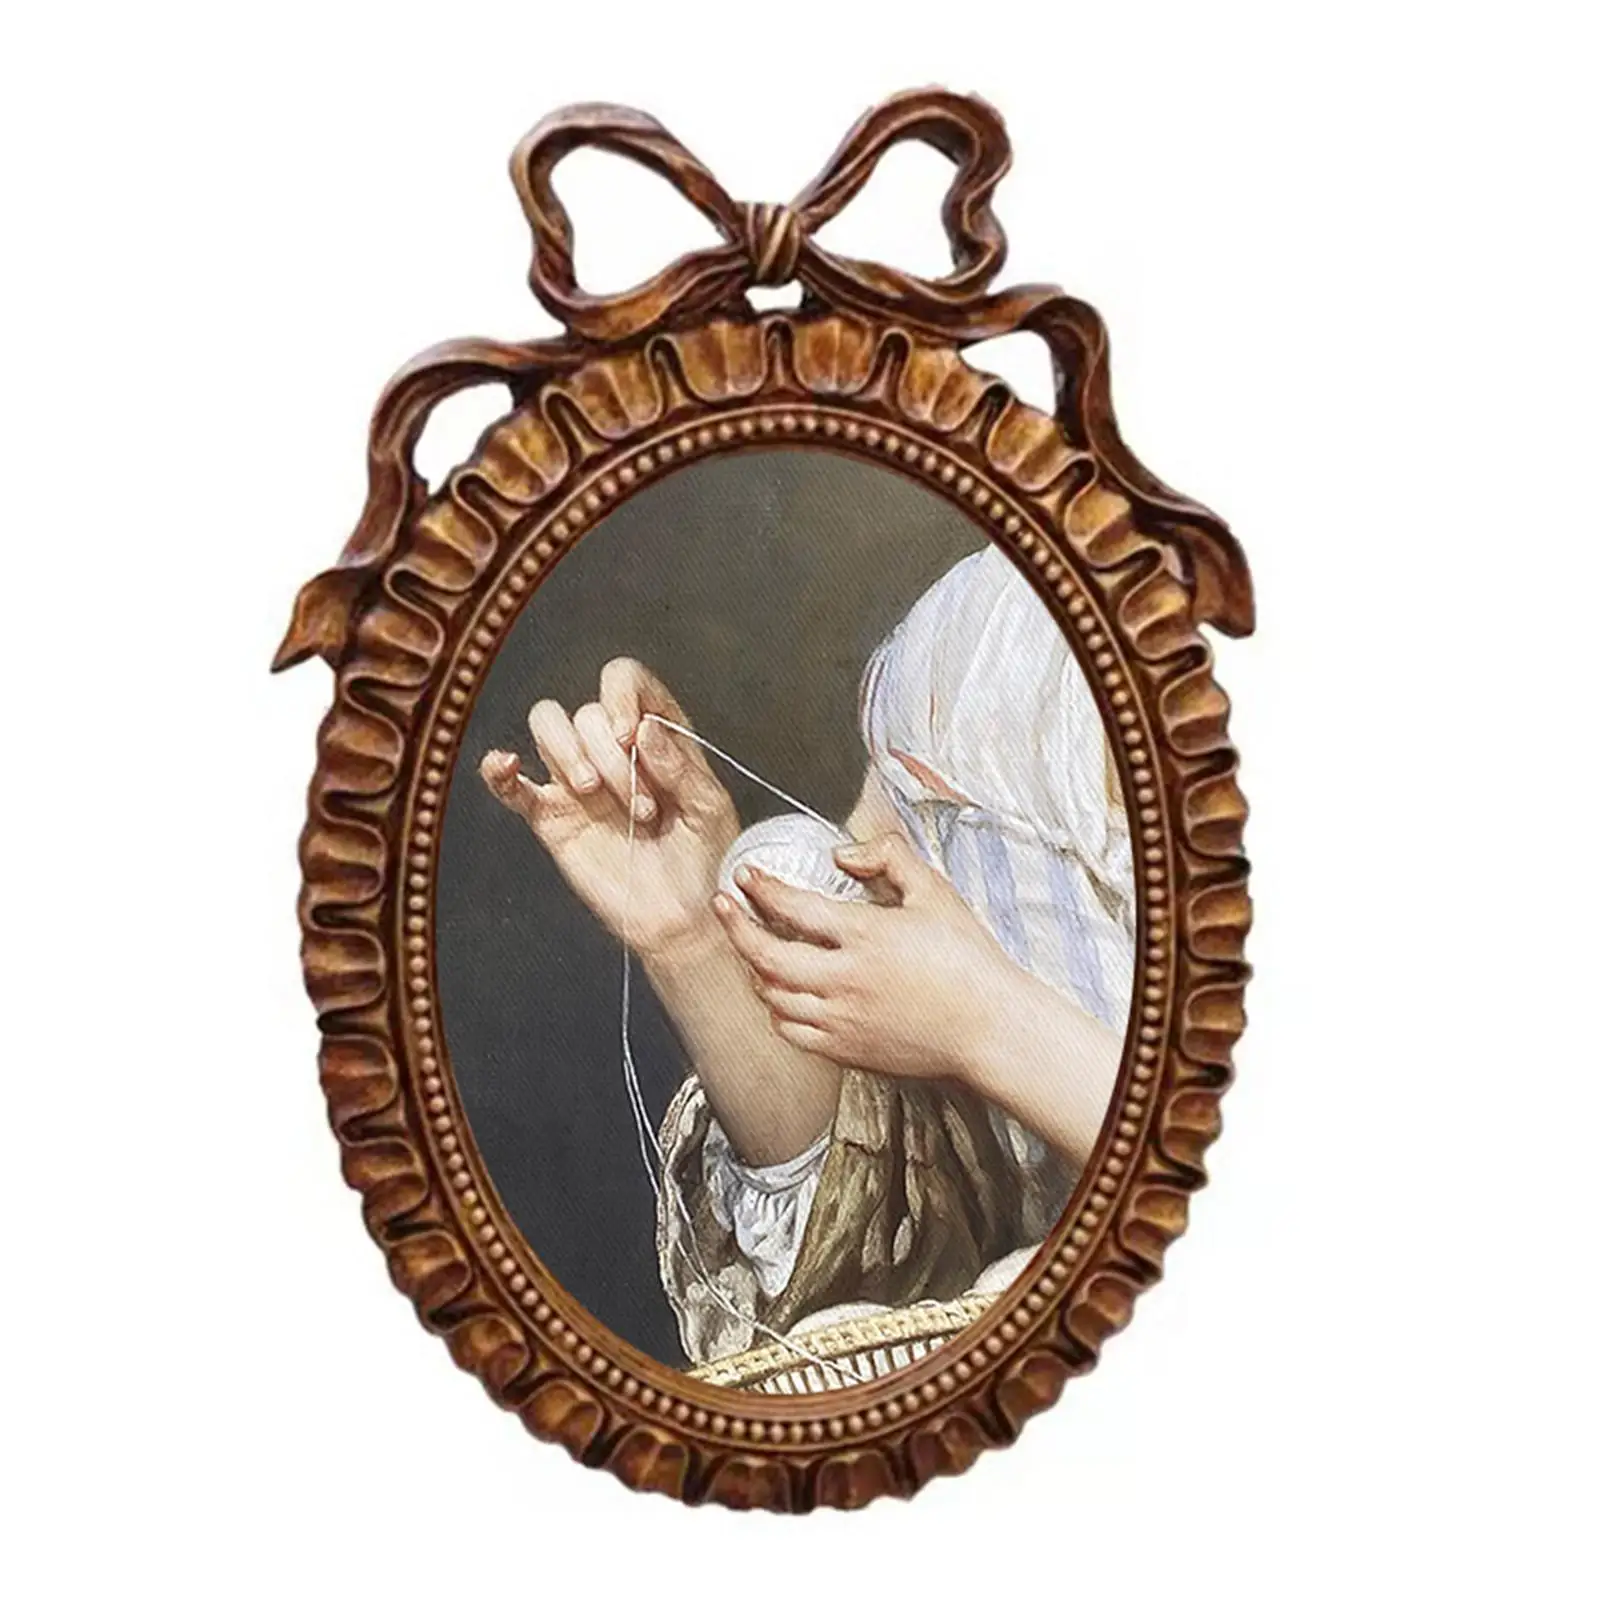 European Style Antique Oval Resin Photo Frame, Wall Mounting for 12x18cm Photo Decoration Gift Home Decor Photo Gallery Art